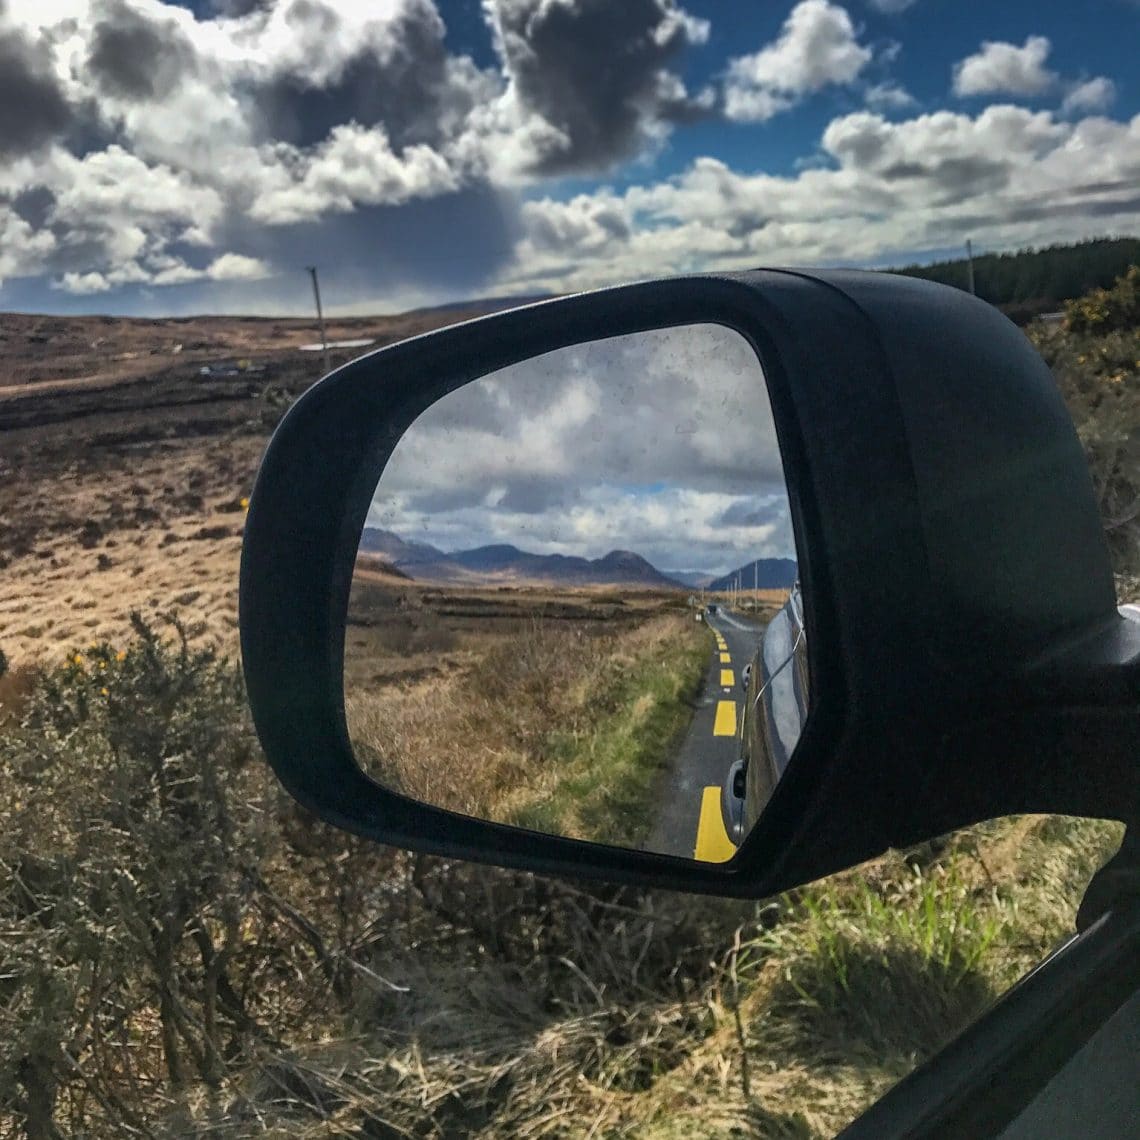 20 Helpful Driving Tips to Have the Best Ireland Road Trip